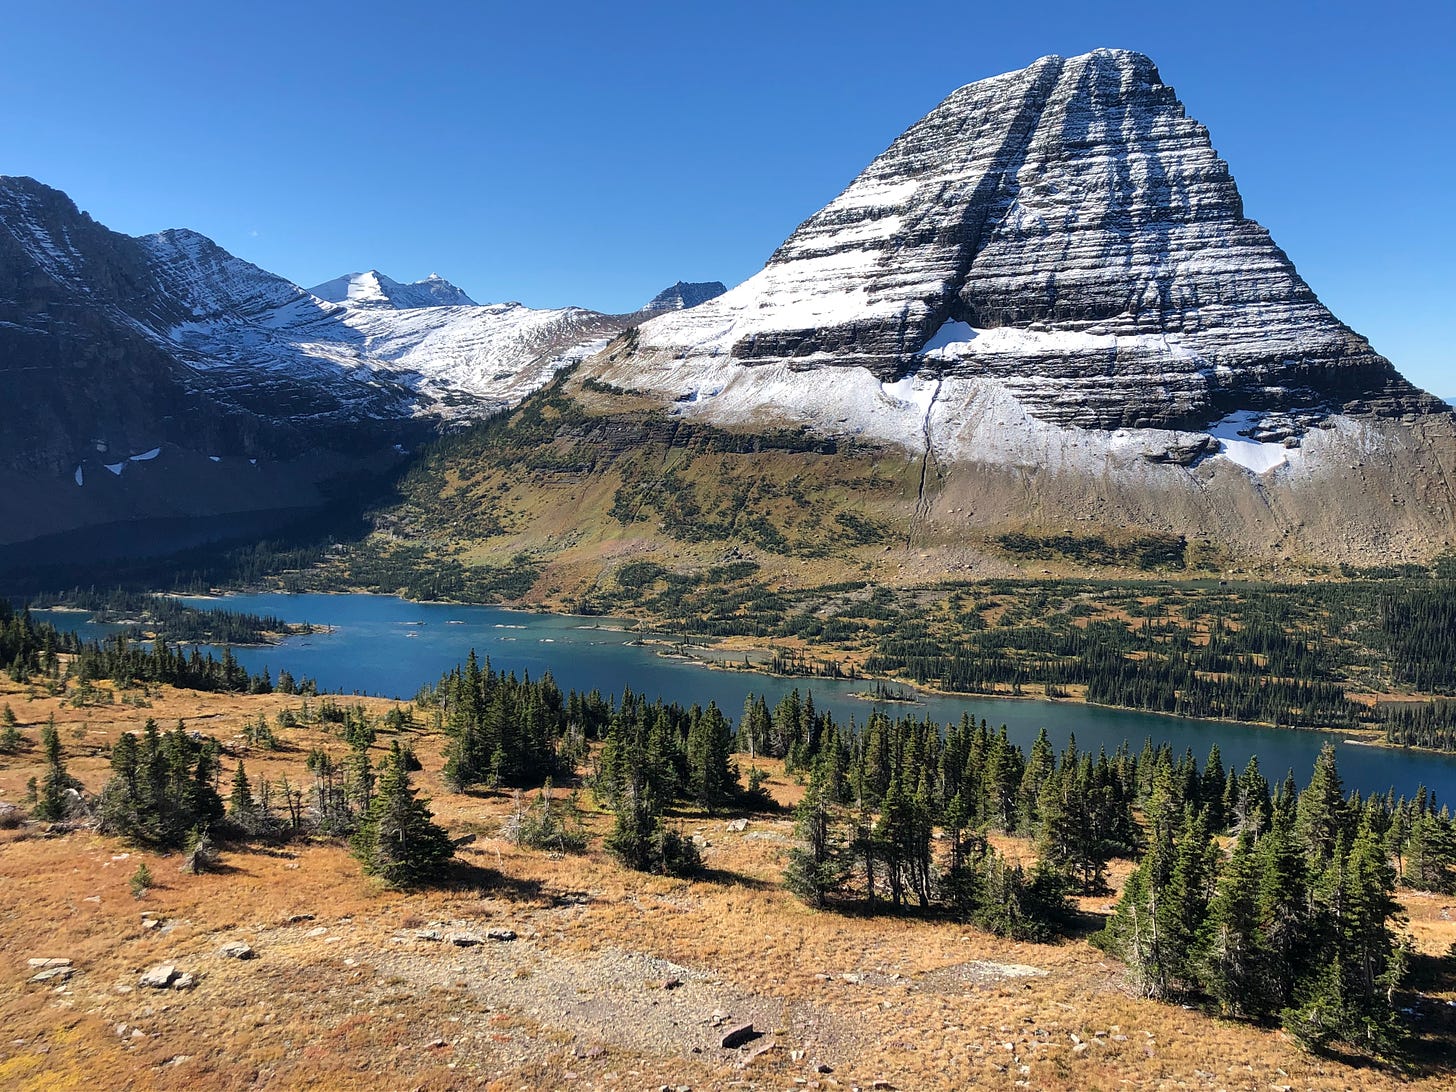 29 September 2020: Logan’s Pass, near the Visitor’s Center on Going-to-the-Sun-Road, Glacier National Park Montana.